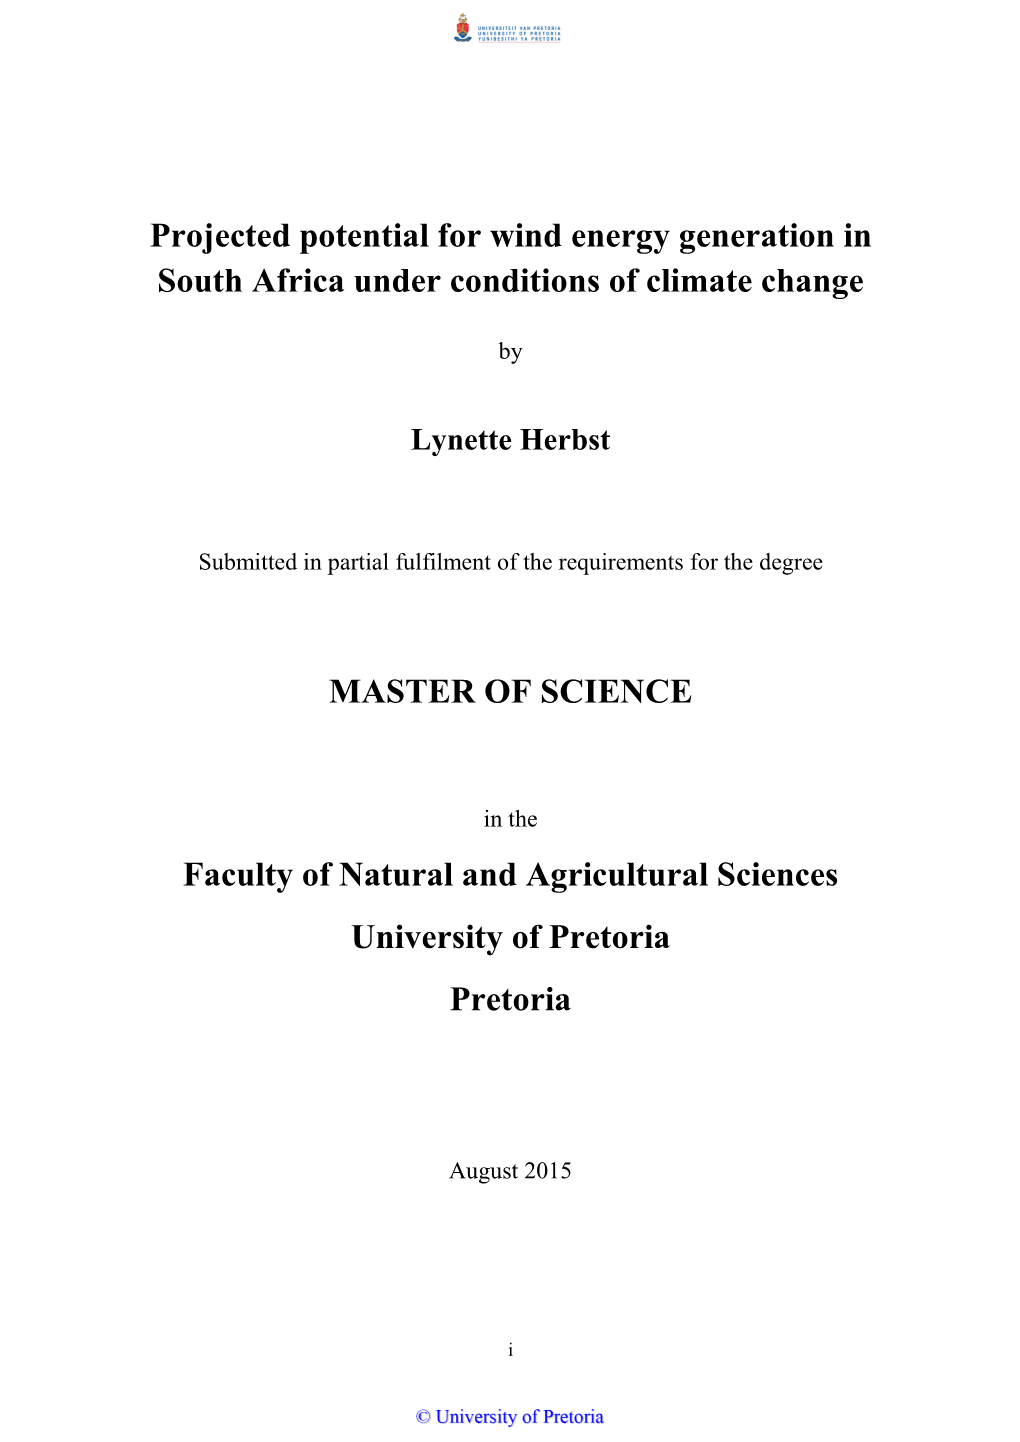 Climate Change Impacts on Southern African Wind Energy Resources